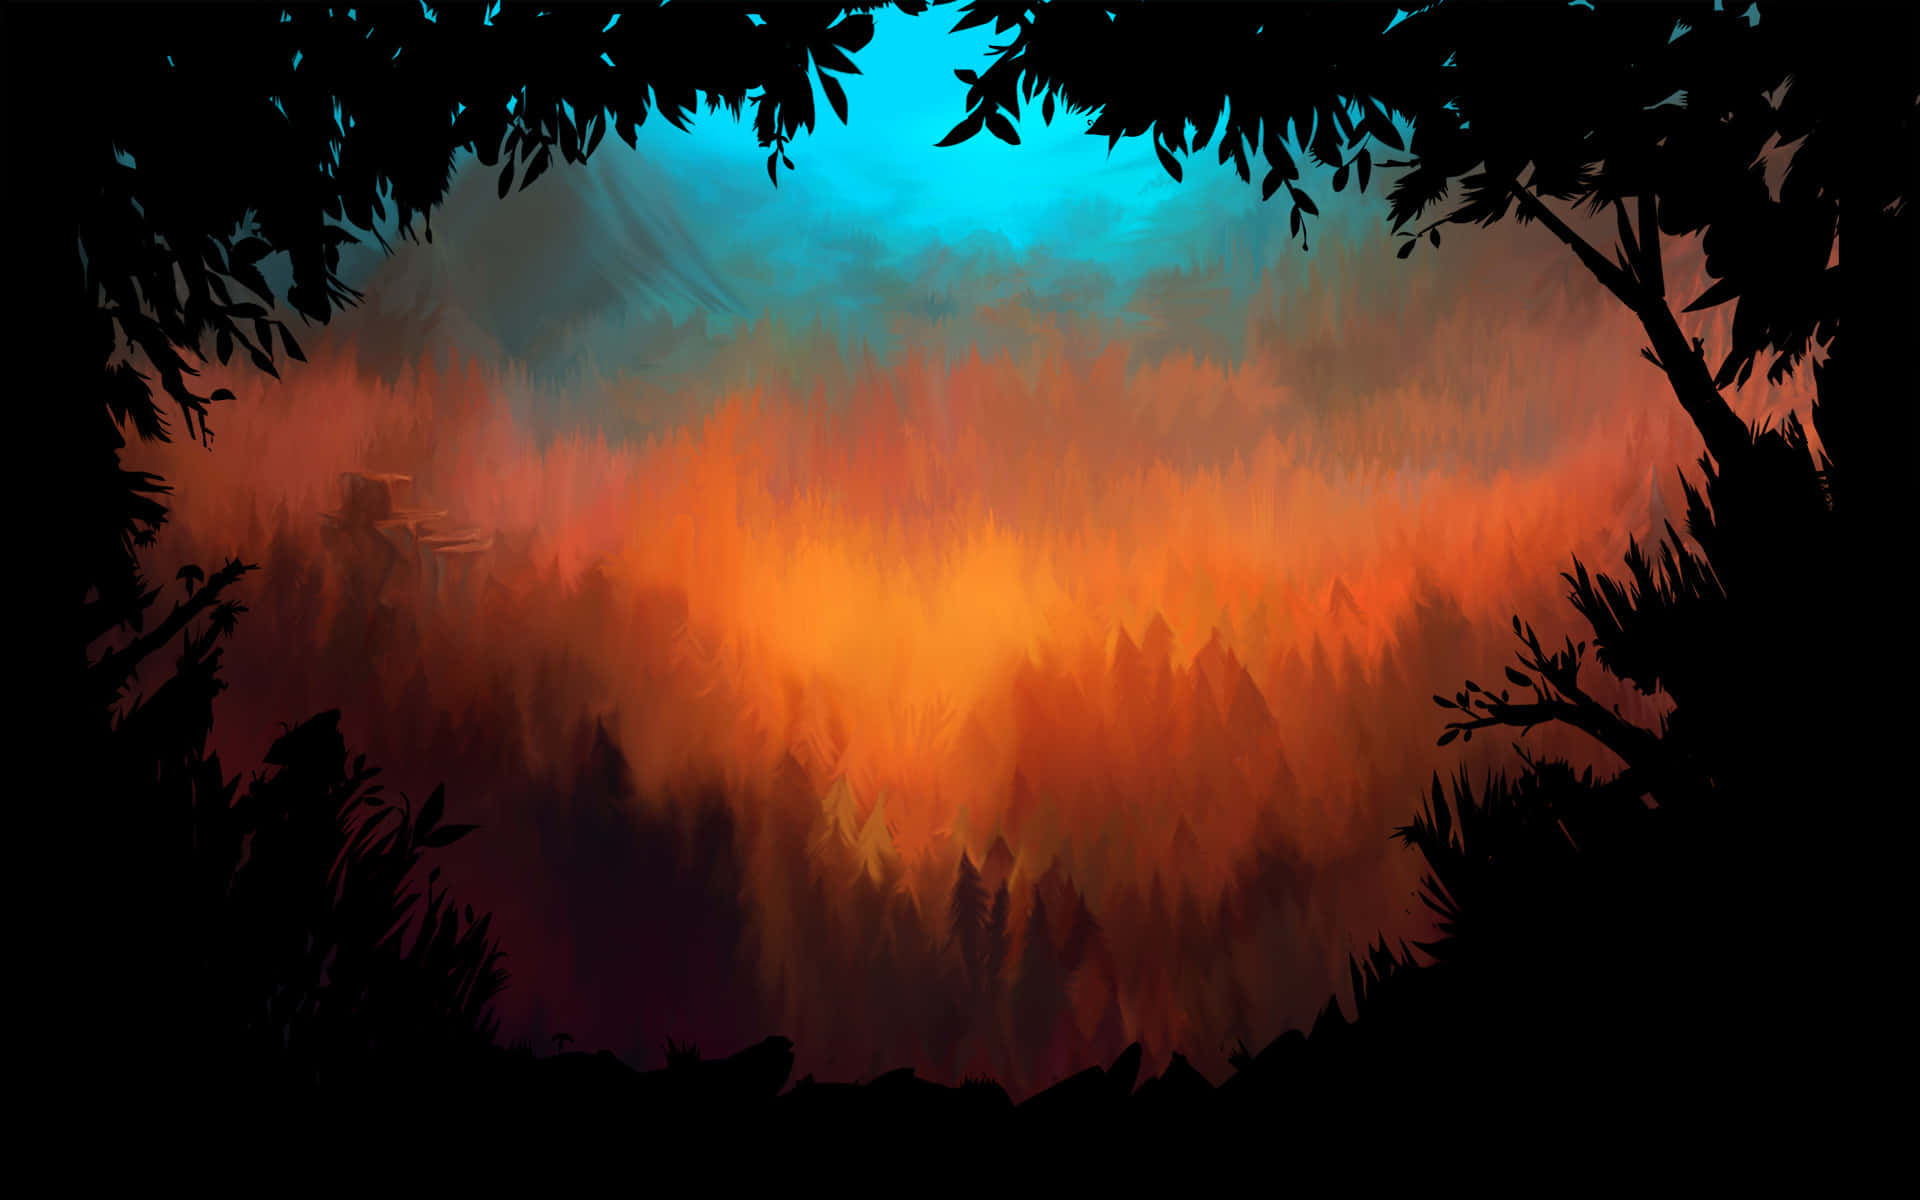 A Painting Of A Forest With A Bright Orange Sky